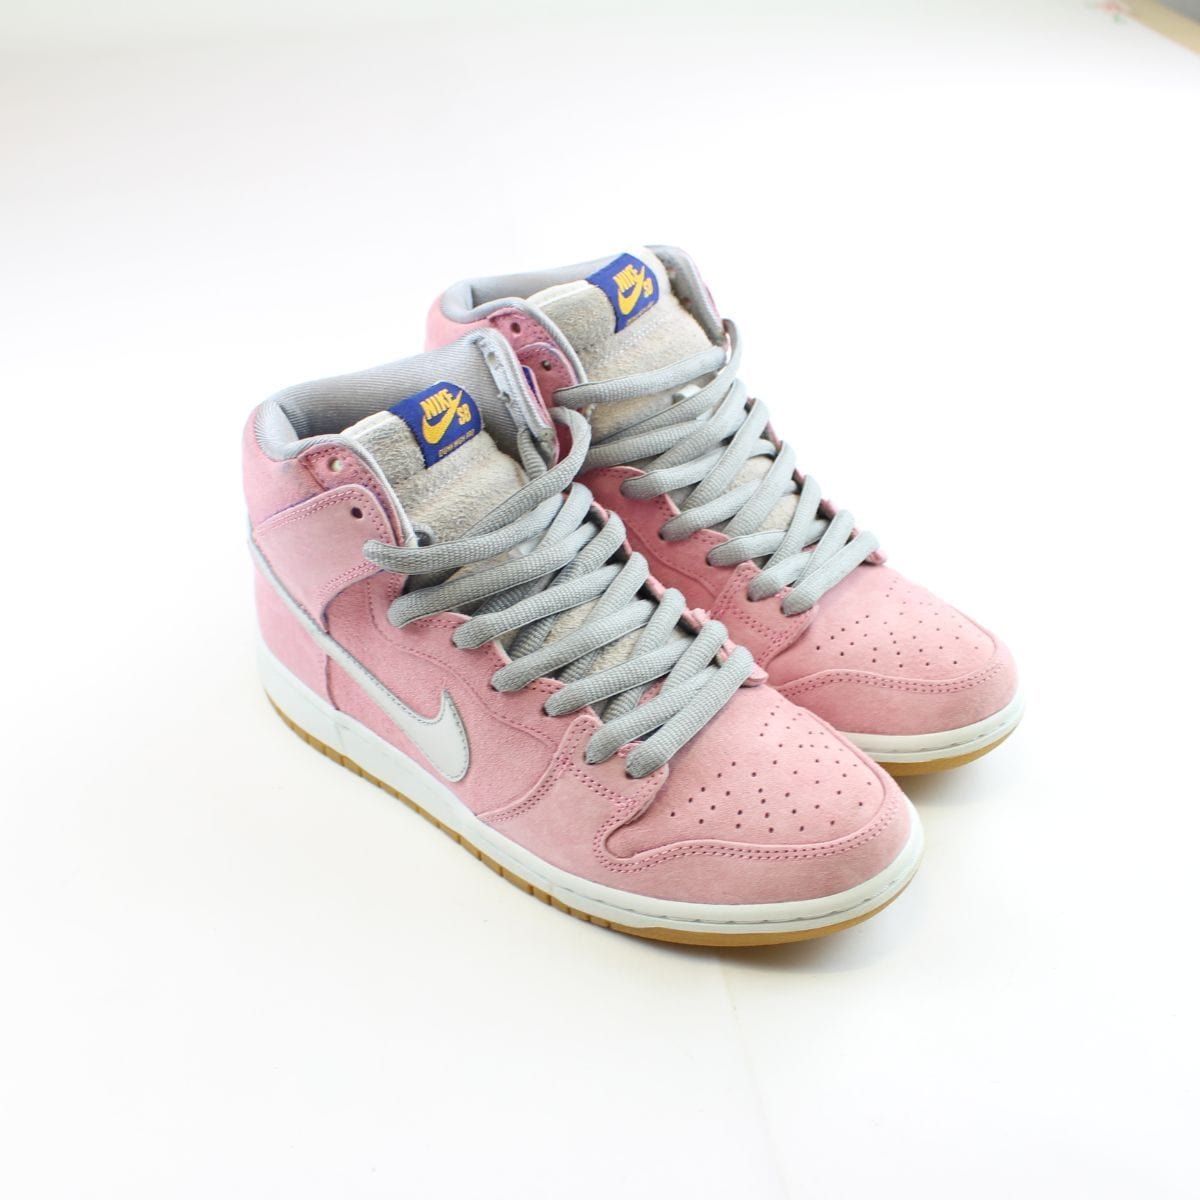 Nike x Concepts Dunk High When Pigs Fly - SaruGeneral